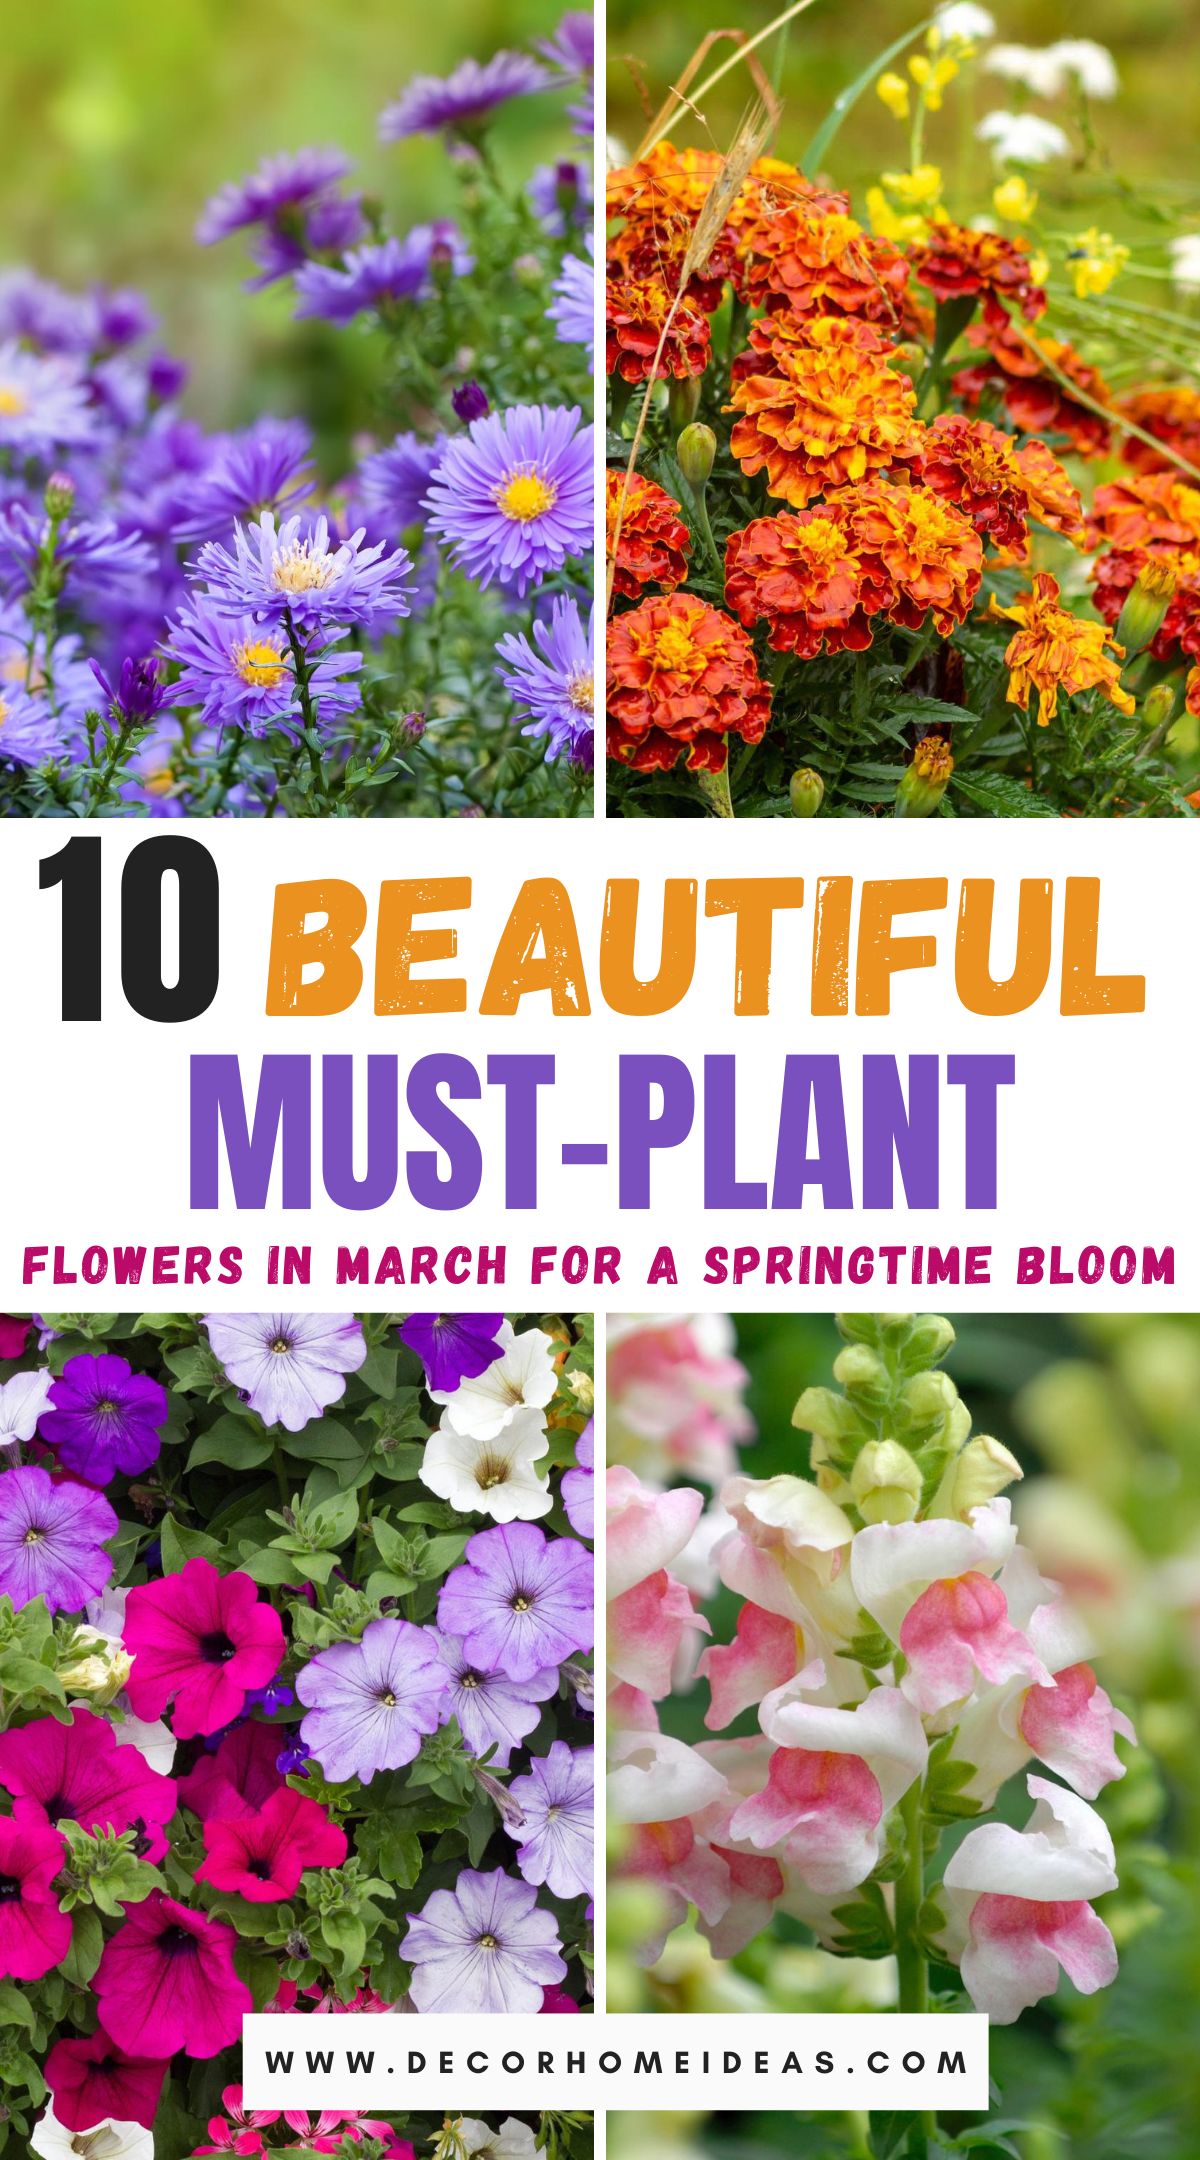 Discover 10 beautiful flowers to plant in March for a garden that blooms with color and vitality. From daffodils to tulips, these early spring bloomers will add charm and vibrancy to your outdoor space.